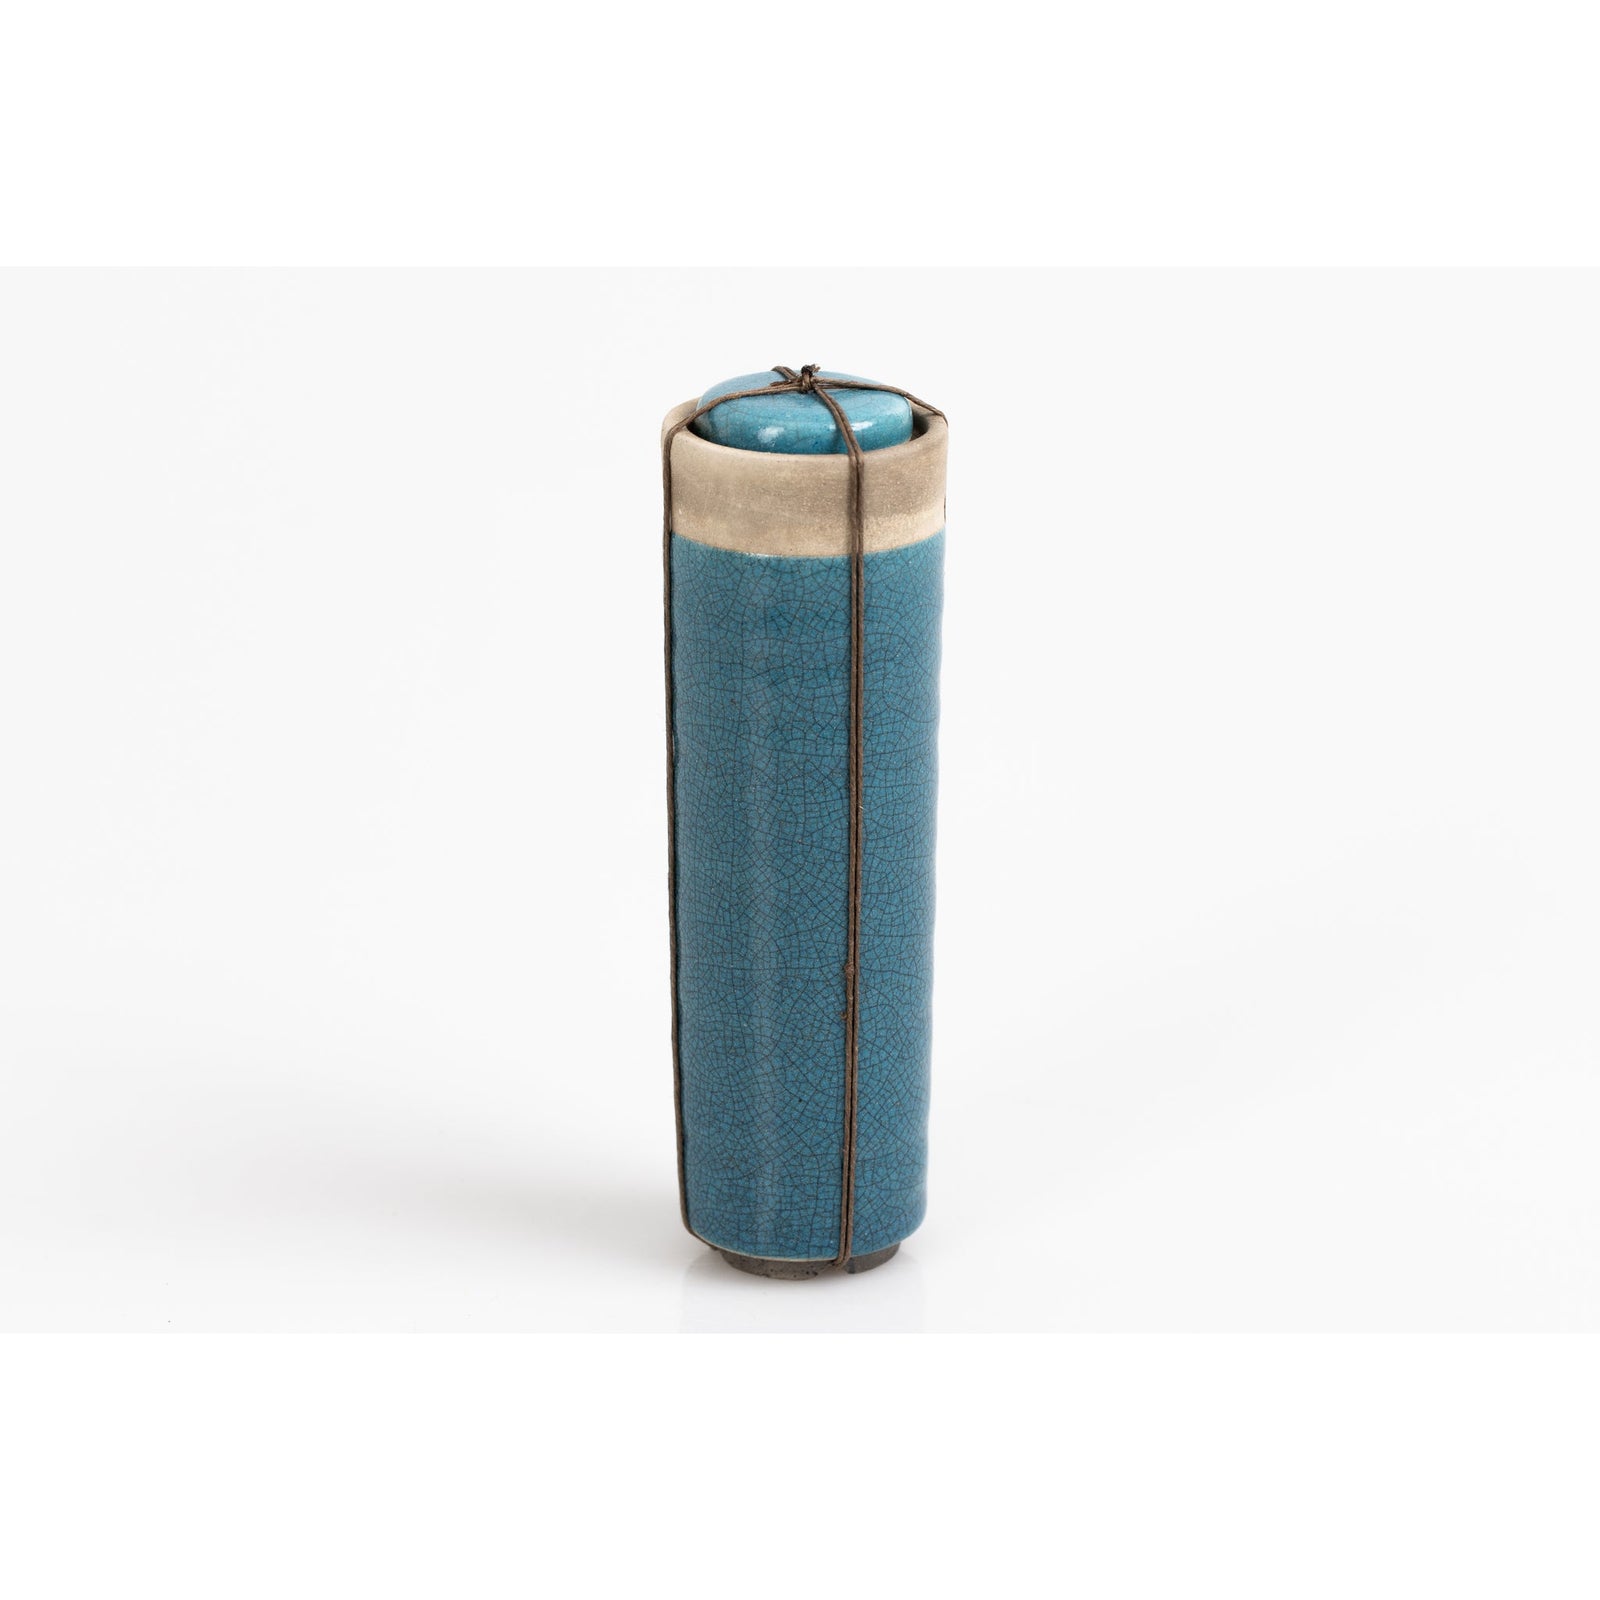 KSEE2 Raku Bound Container by Kate Schuricht, available at Padstow Gallery, Cornwall